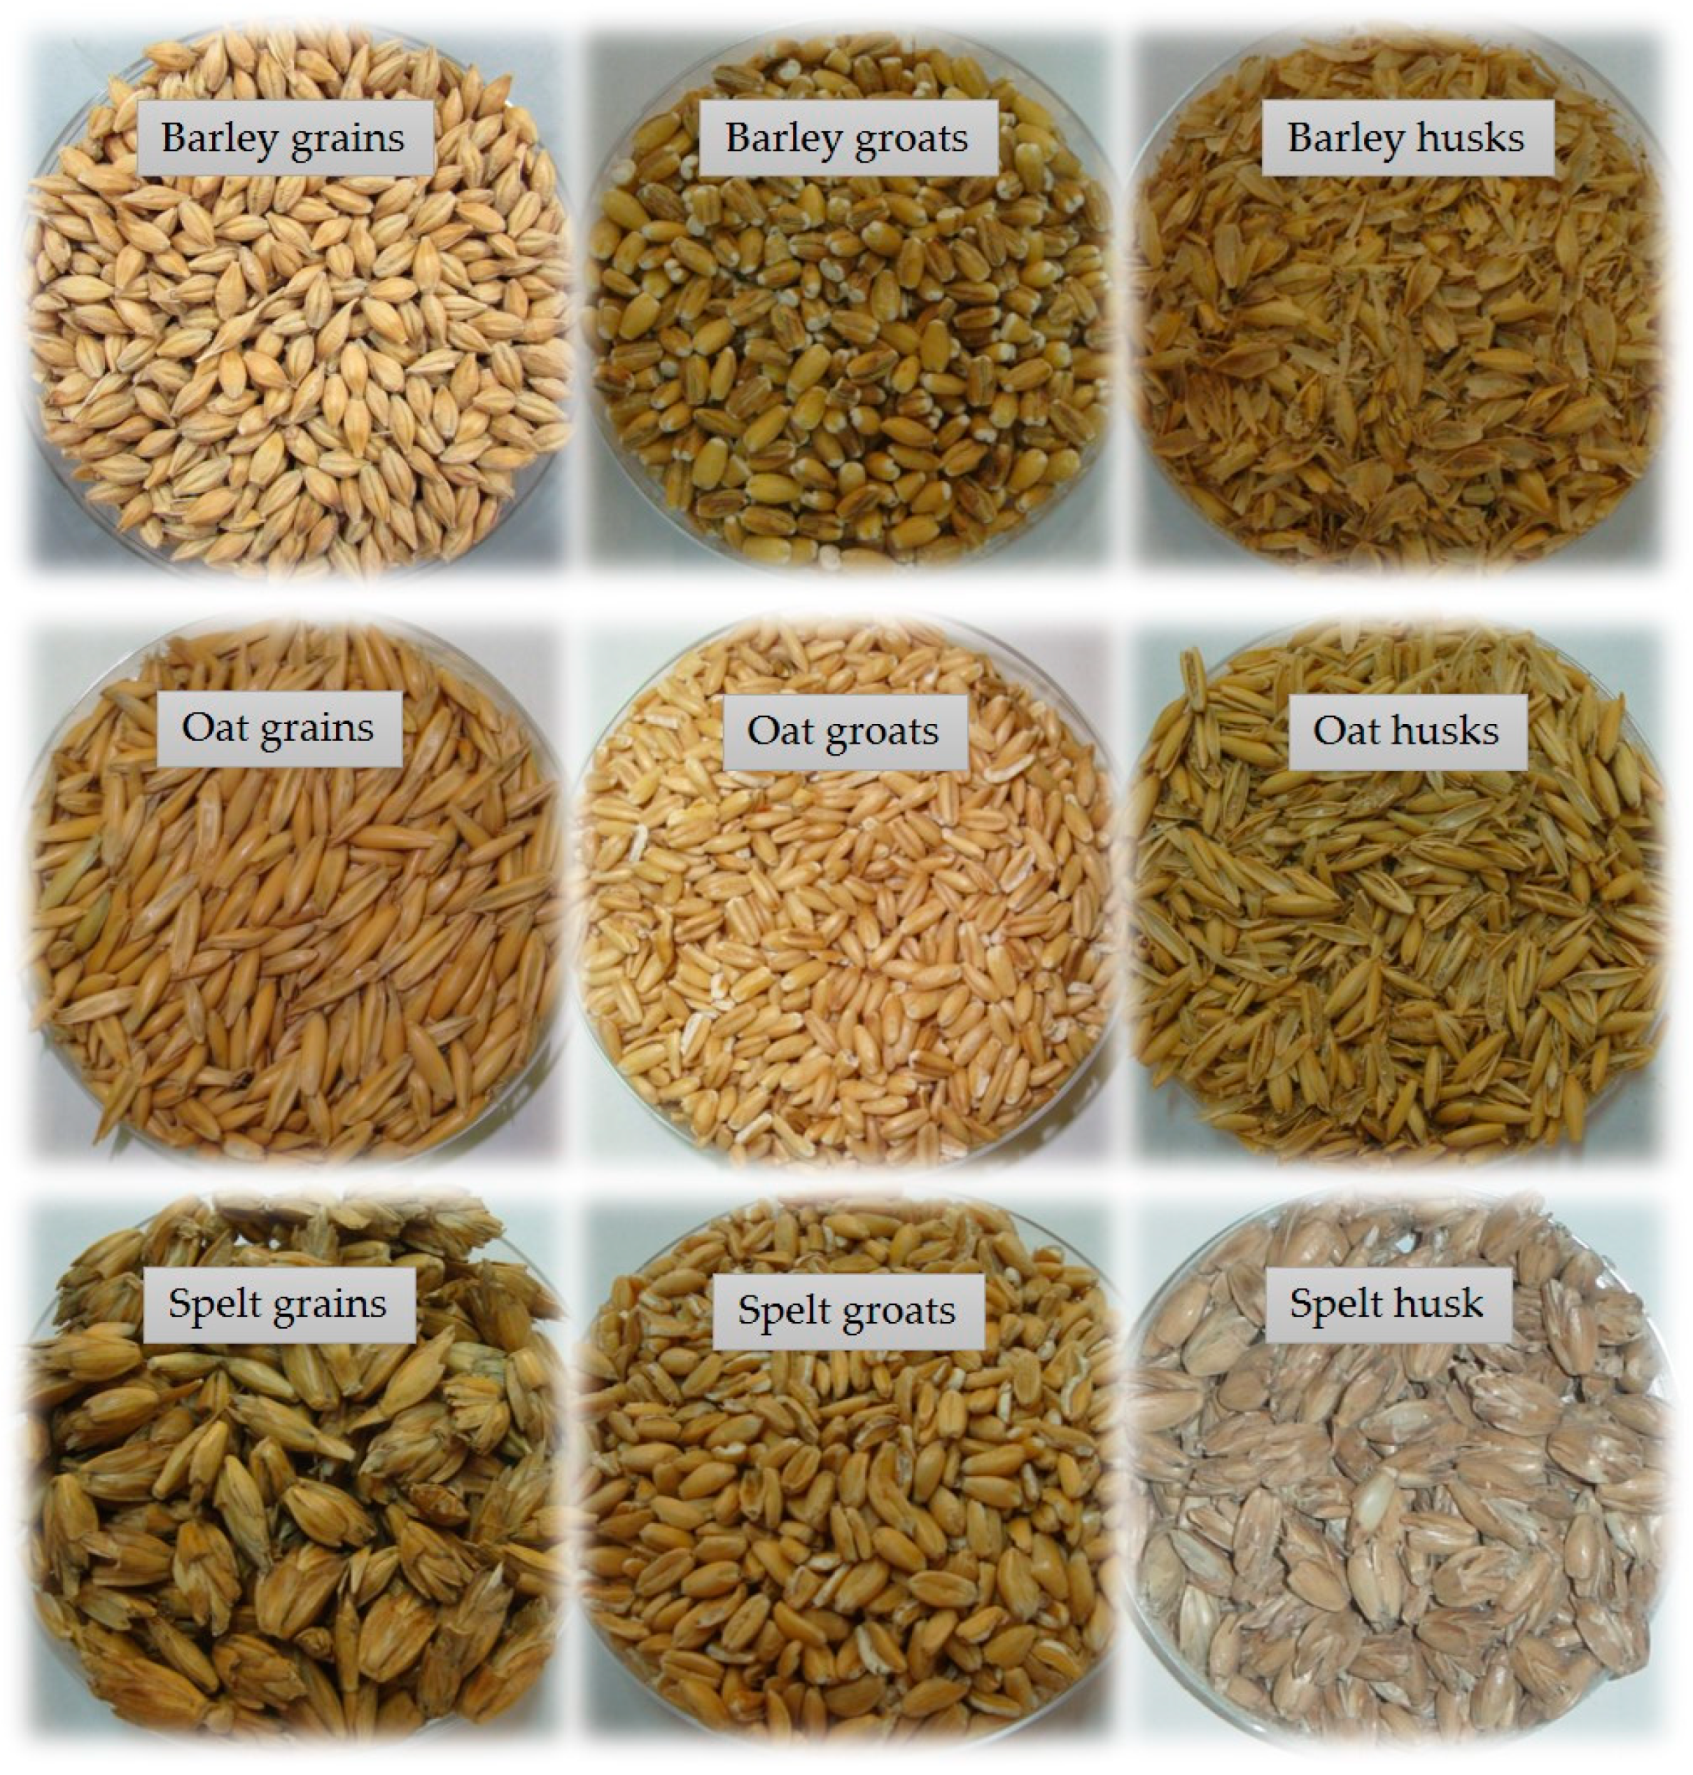 Foods | Free Full-Text | Compositional Traits of Grains and Groats of  Barley, Oat and Spelt Grown at Organic and Conventional Fields